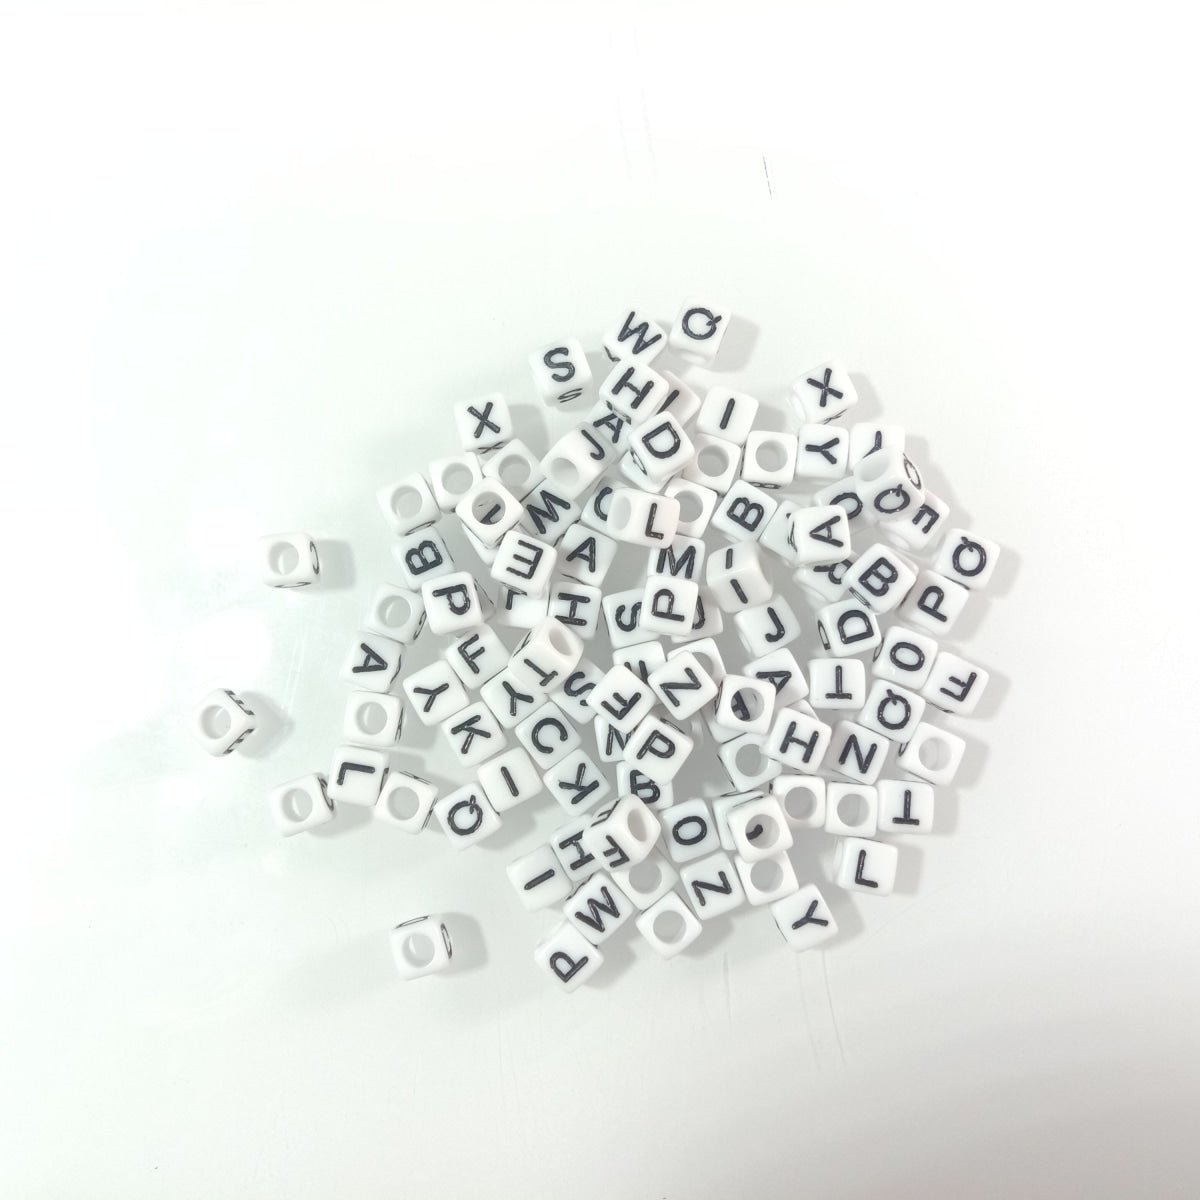 100pcs 6x6mm Square Beads Letters Alphabet Dice DIY Jewellery Making Moon Love Heart Cloud Star - Black on White - - Asia Sell